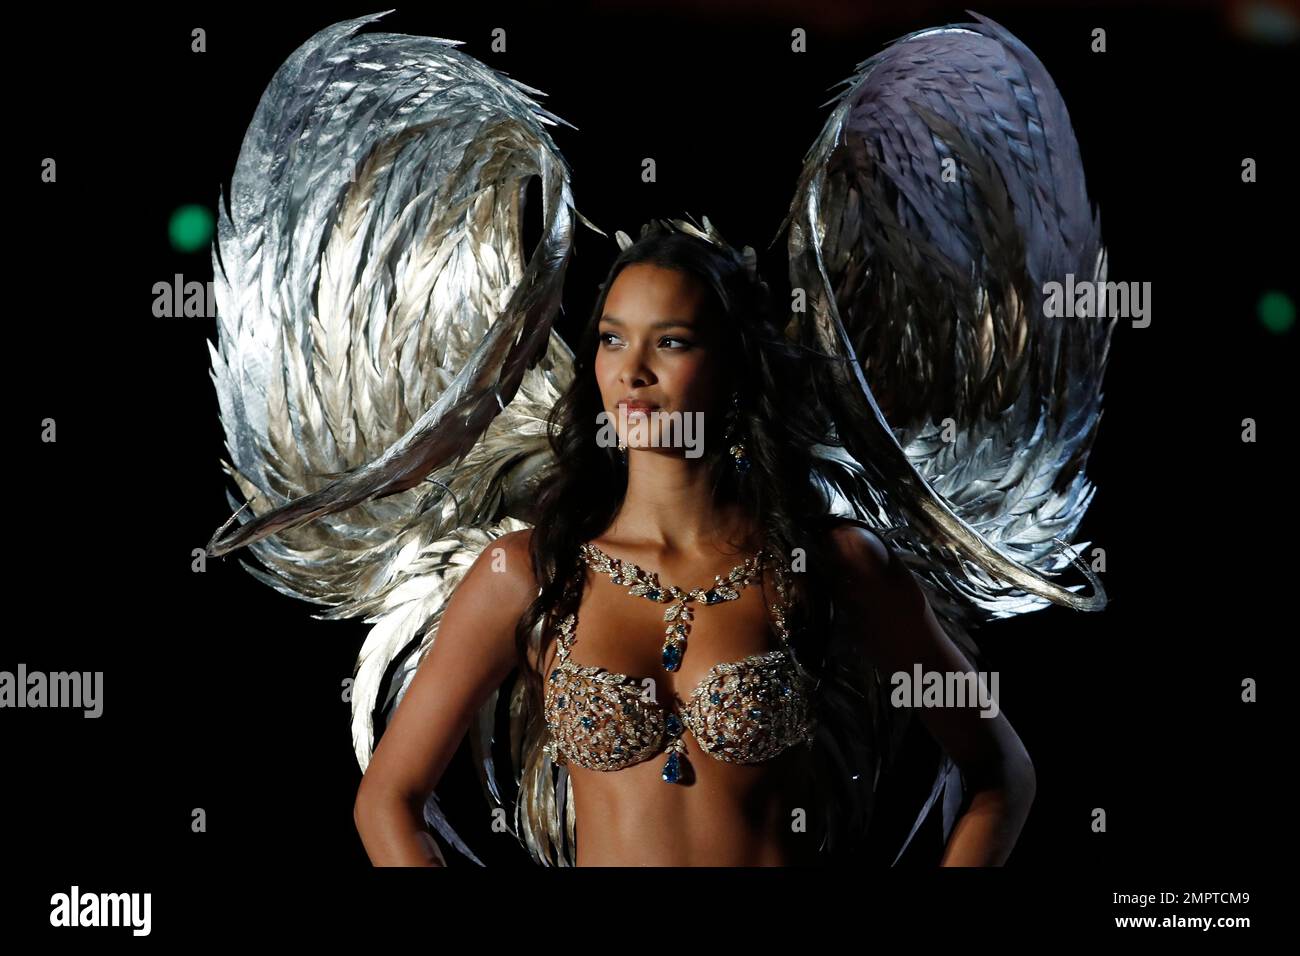 Brazilian model Lais Ribeiro presents the $2 million Champagne Nights  Fantasy Bra by Mouawad, during the Victoria's Secret fashion show at the  Mercedes-Benz Arena in Shanghai, China, Monday, Nov. 20, 2017. (AP